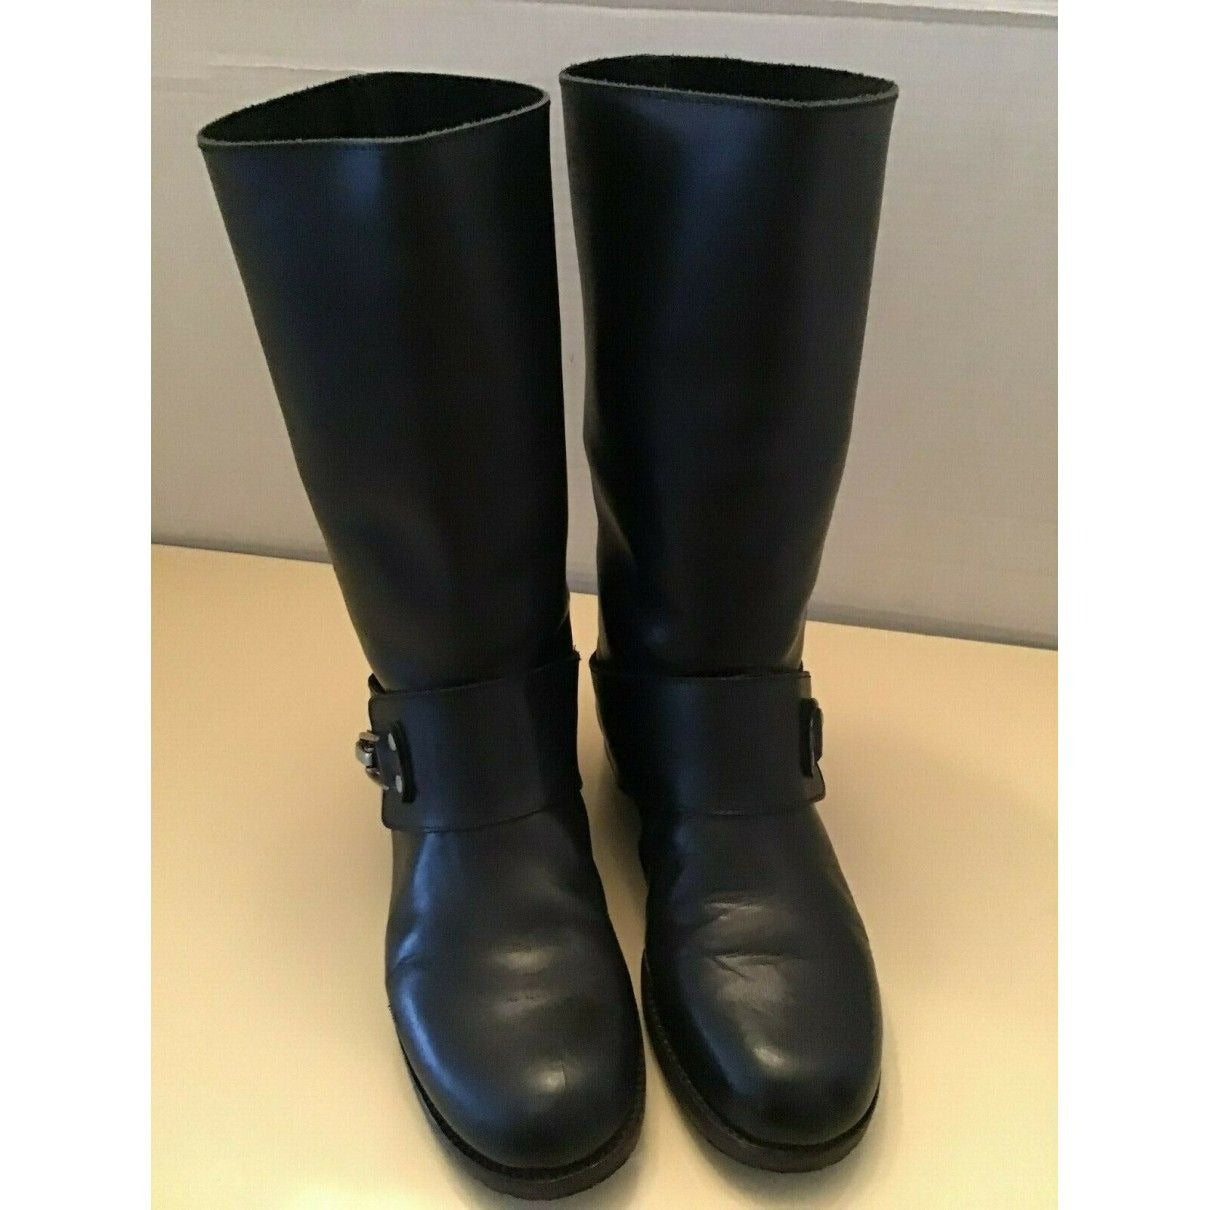 A pair of See by Chloe, size 7, black leather moto style boots with pull on closure, rounded toes, 1" block heels, and chrome buckles